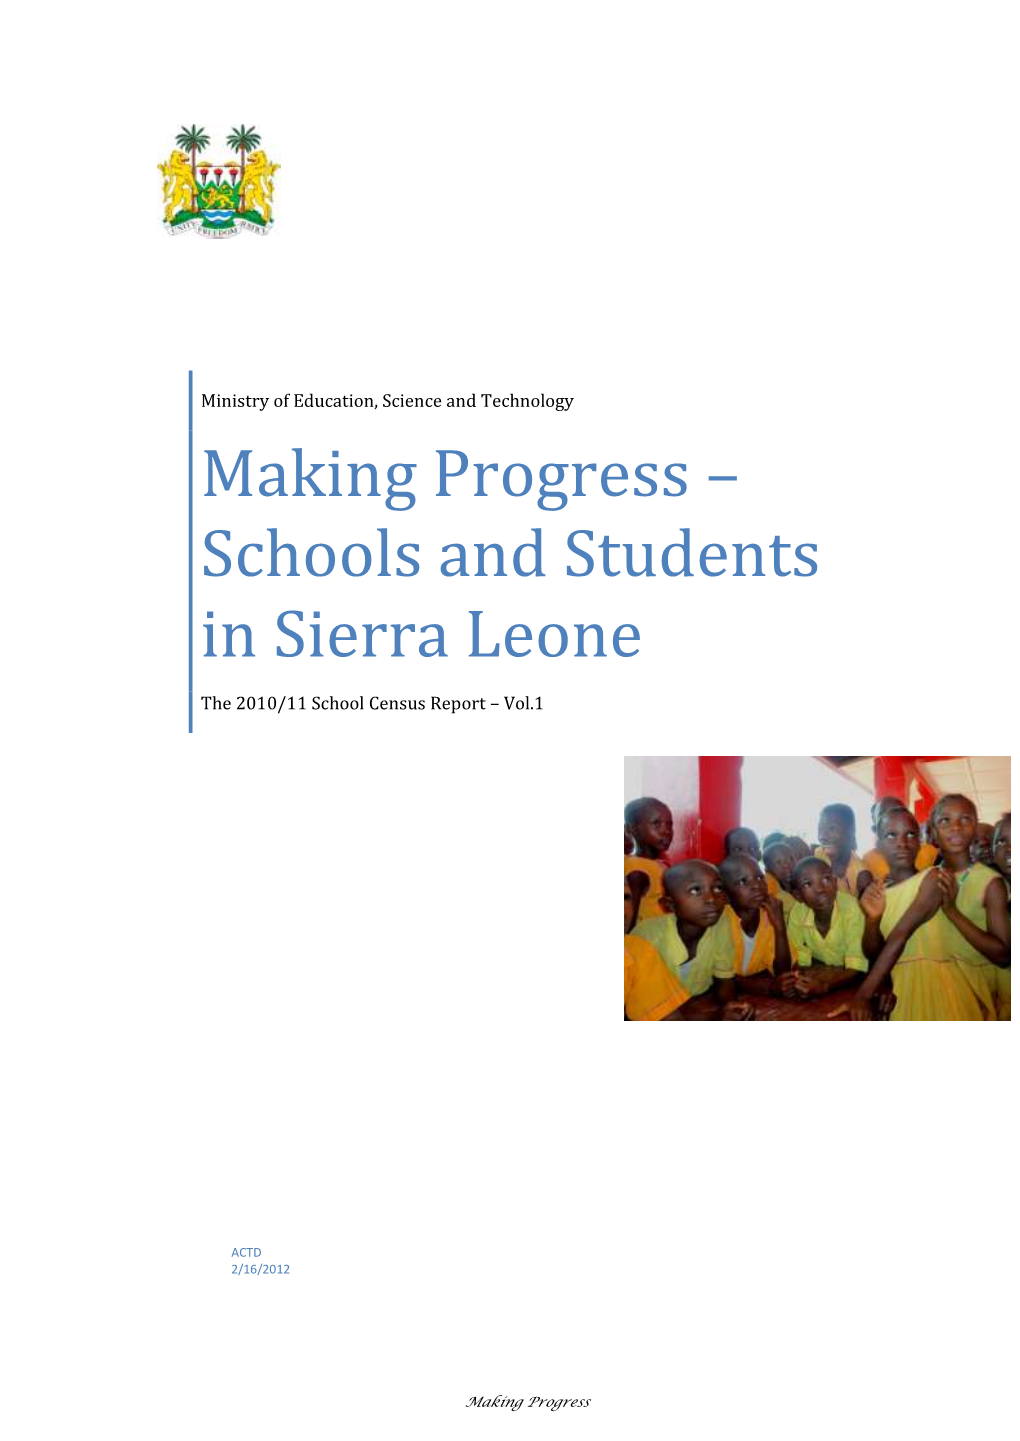 Schools and Students in Sierra Leone